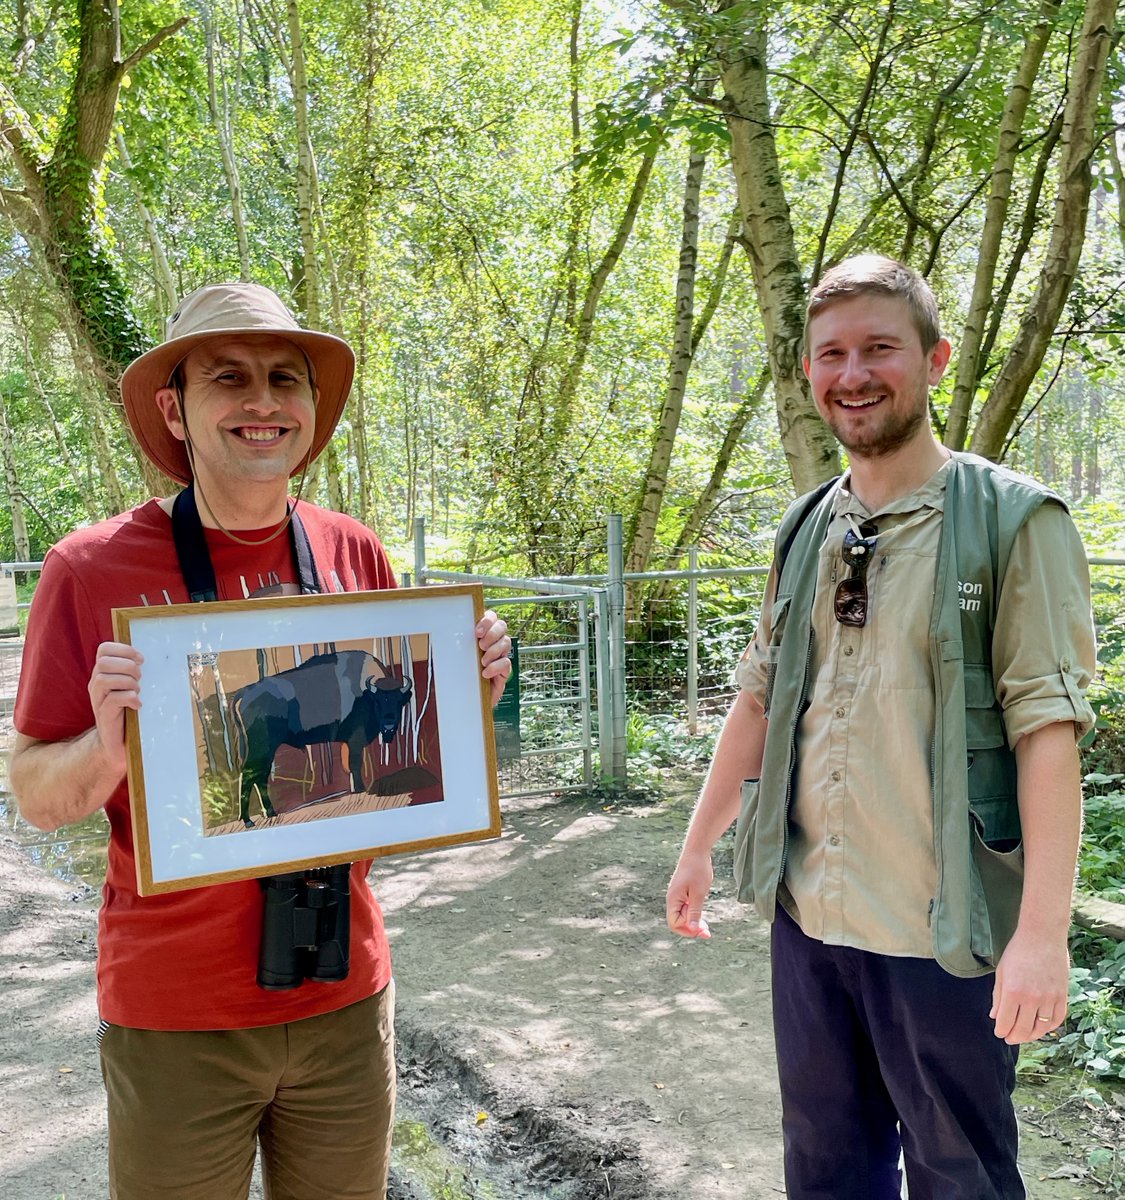 Great time on Sat with Tom + Louise from  @KentWildlife learning about the #WilderBlean #bison #reintroduction project Presenting a picture I did of the matriarch Great partnership with @WildwoodTrust and @PPLPubAffairs true #socialvalue #ESG #wildlifeart #conservation #inclusion